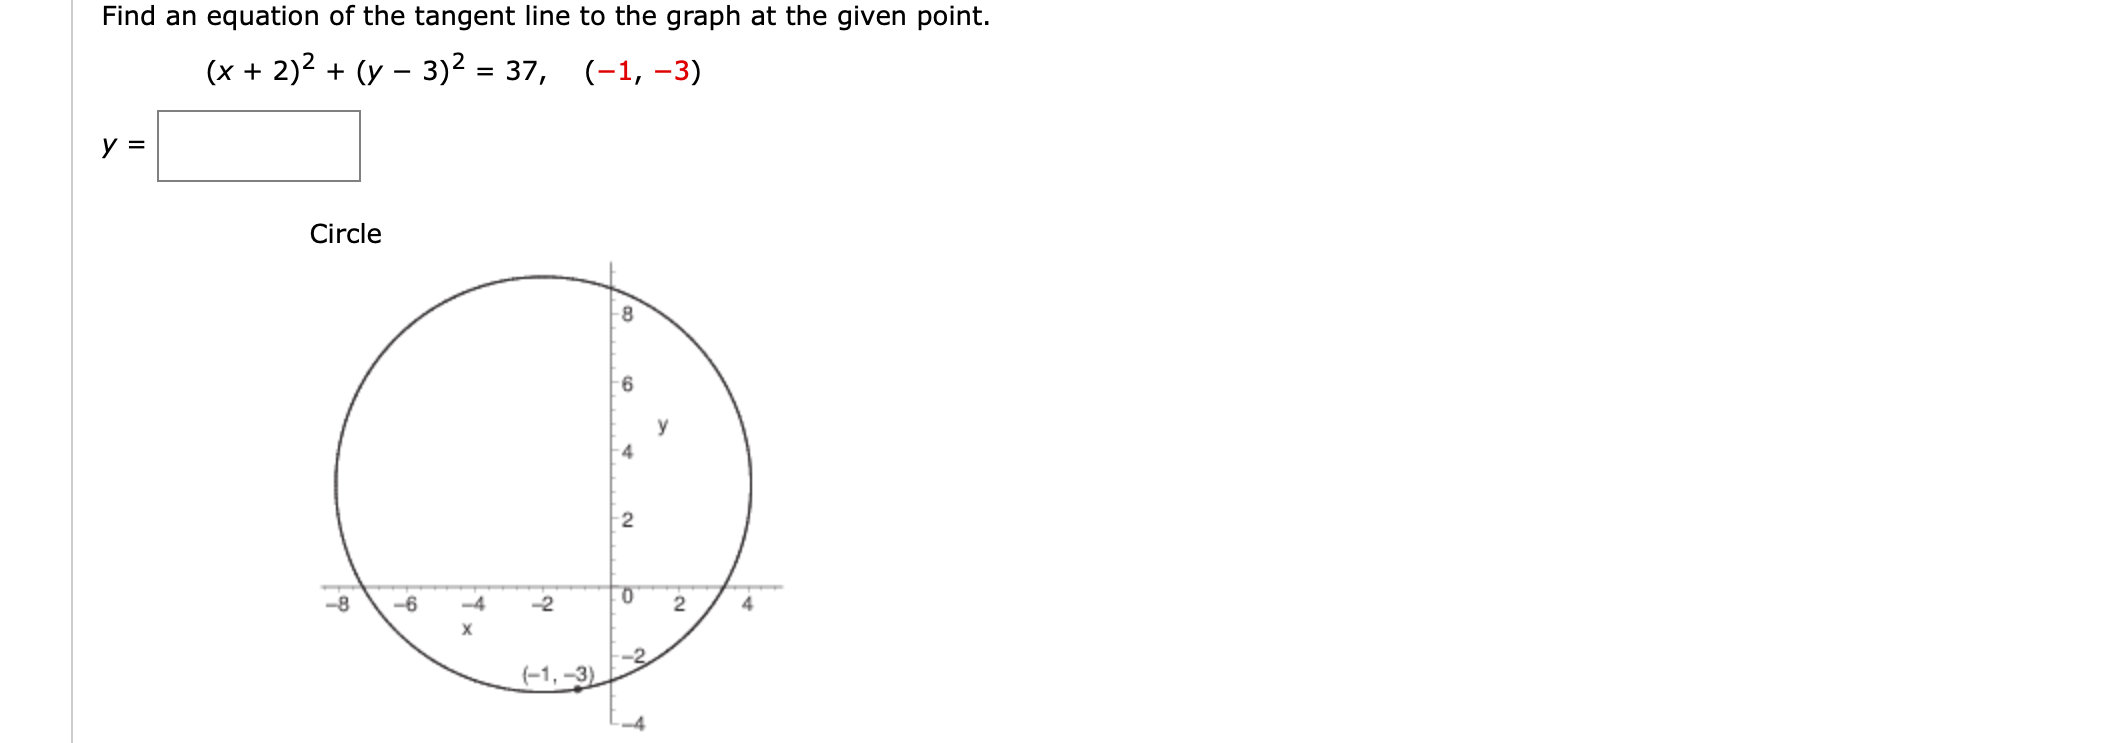 Find an equation of the tangent line to the graph at the given point.
(x + 2)2 + (y – 3)² = 37, (-1, –3)
